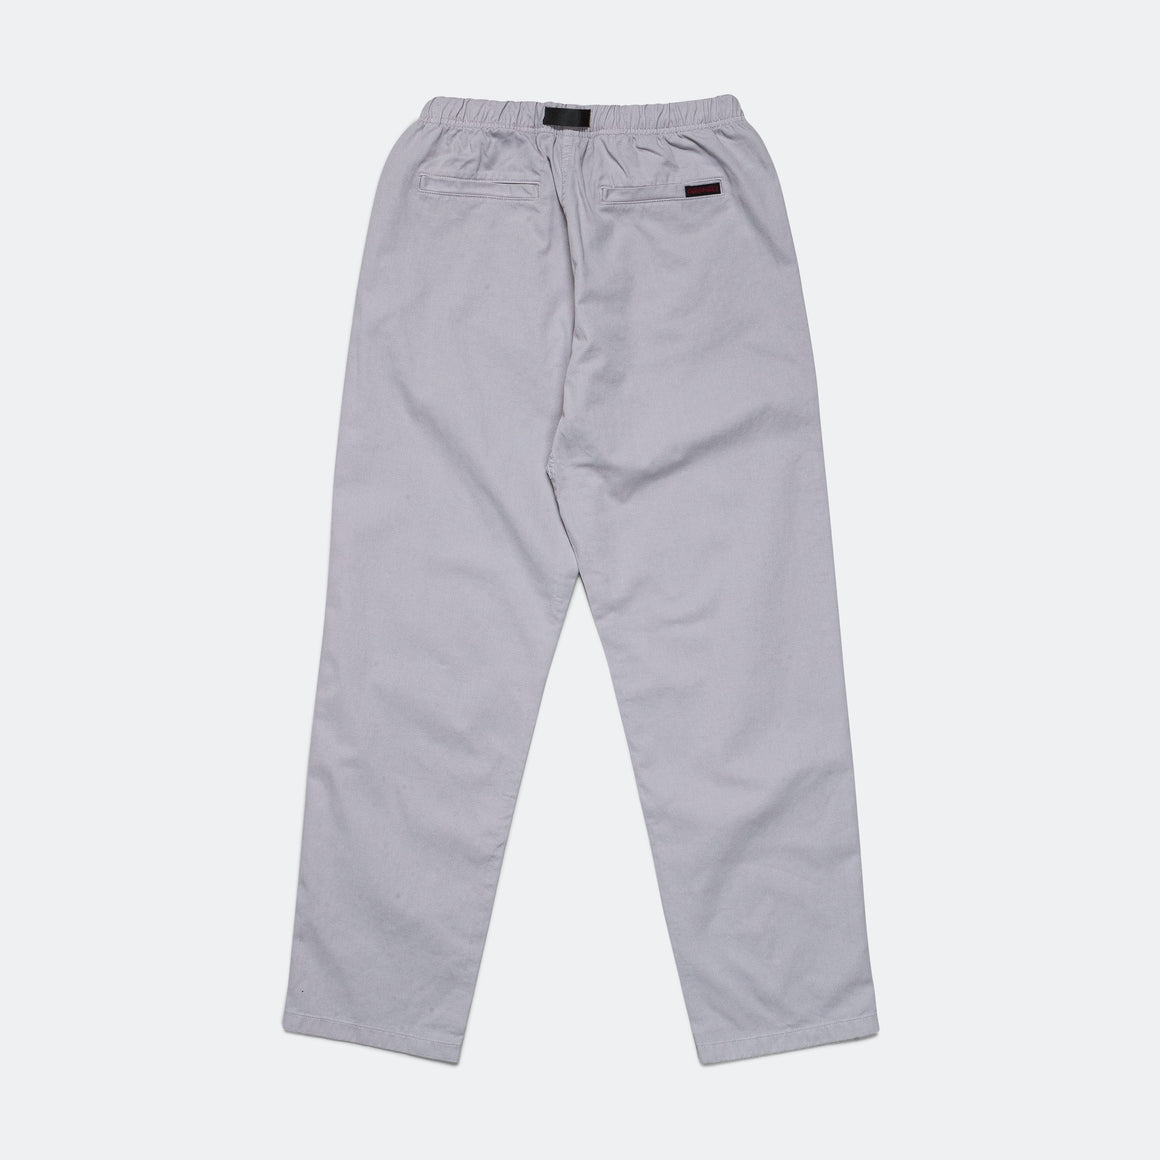 Gramicci - Gramicci Pant - Dusty Lavender - UP THERE